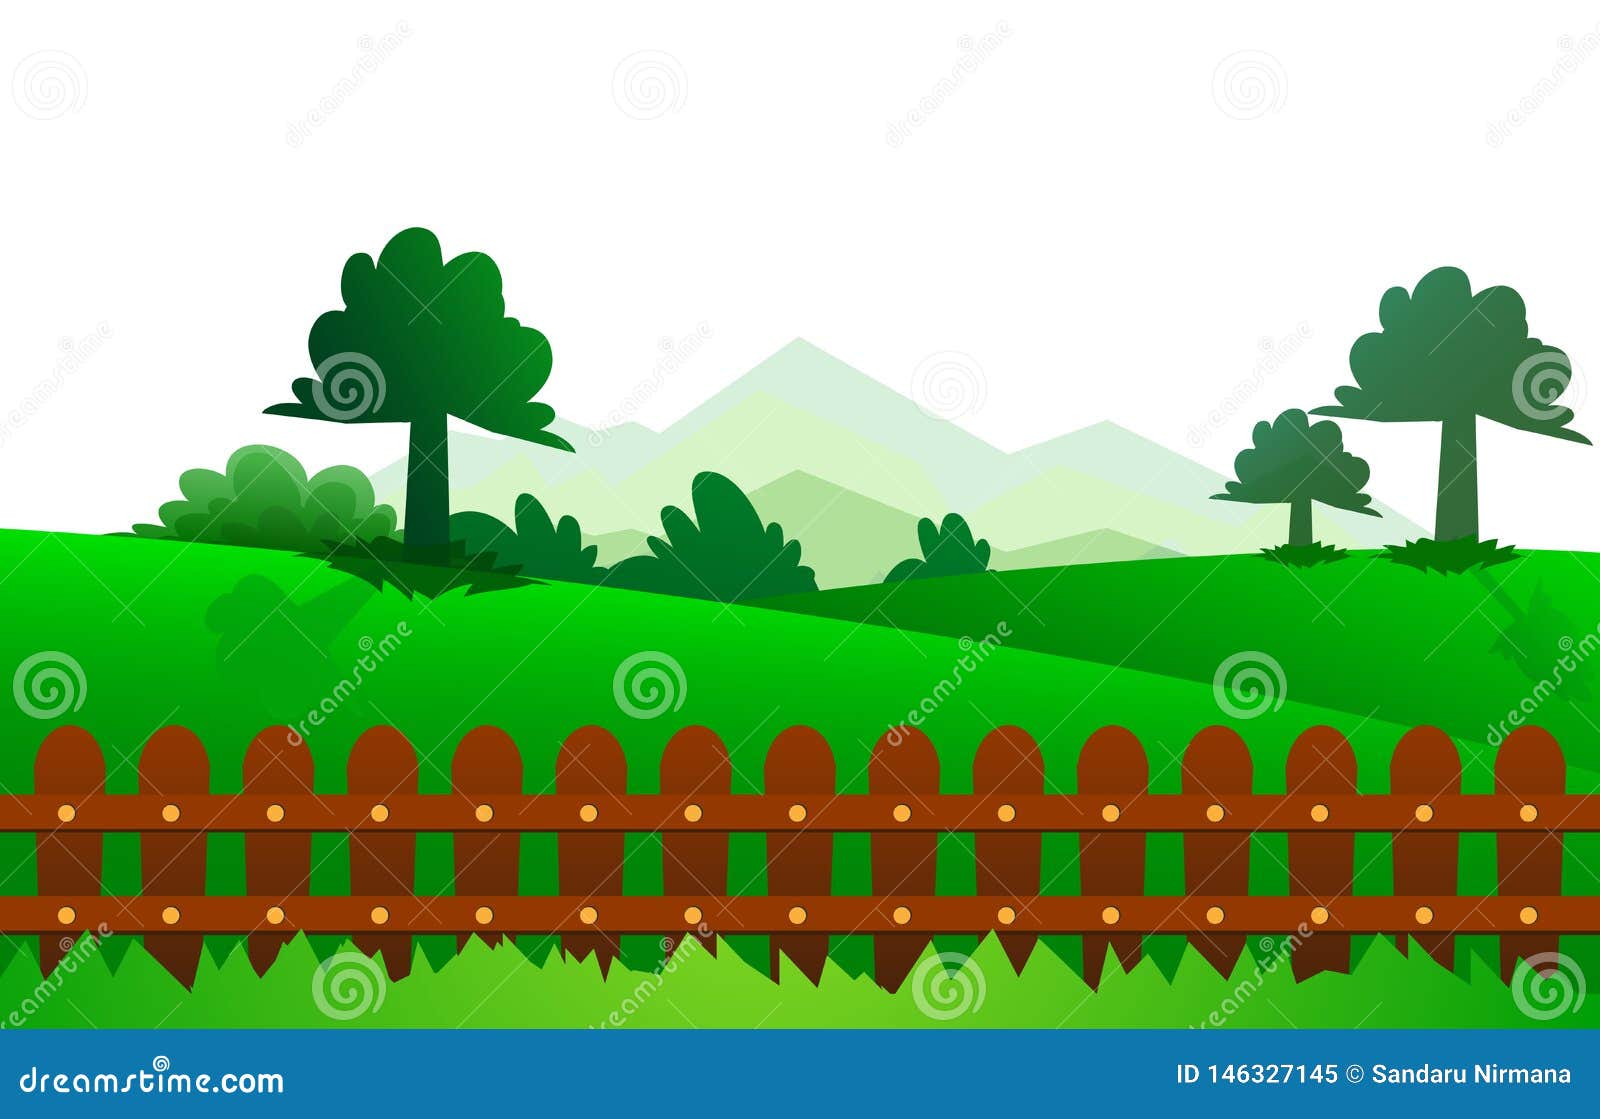 fence with green garden grass tree green meadow feild in ai10 s